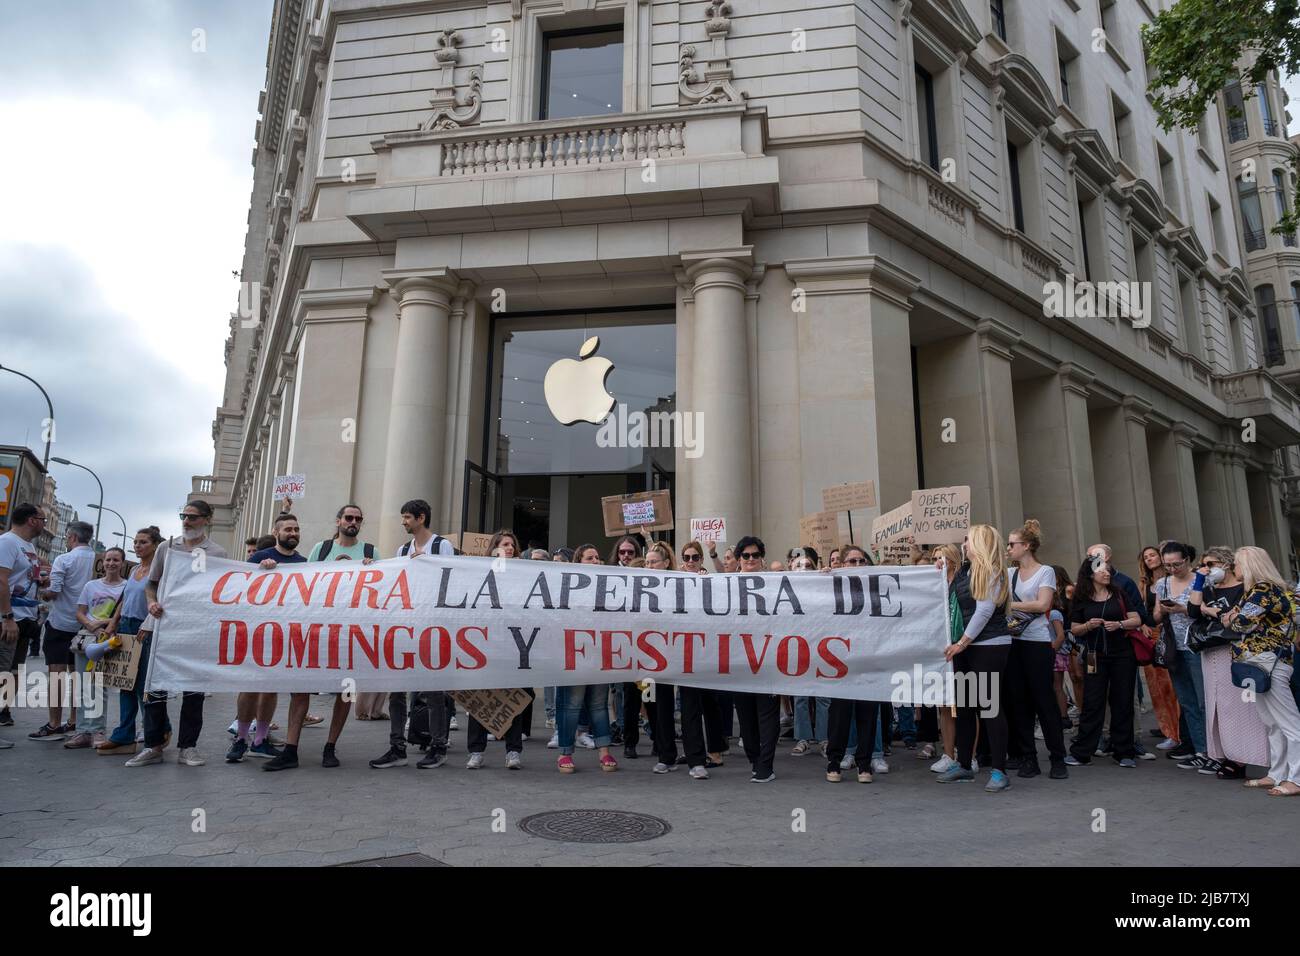 Trade unionists and workers are seen holding the unitary banner against commercial opening on Sundays and public holidays in front of the door of the Apple store in Plaza de Catalunya. Shouting 'we want to reconcile work and family', trade unionists and workers in the retail sector have demonstrated in front of the emblematic shops on Passeig de Gràcia to protest the extension of working hours to Sundays approved by the Government of the Generalitat of Catalonia and ratified by the Barcelona City Council in order to define a new tourist area for commercial opening. (Photo by Paco Freire/SOPA Stock Photo